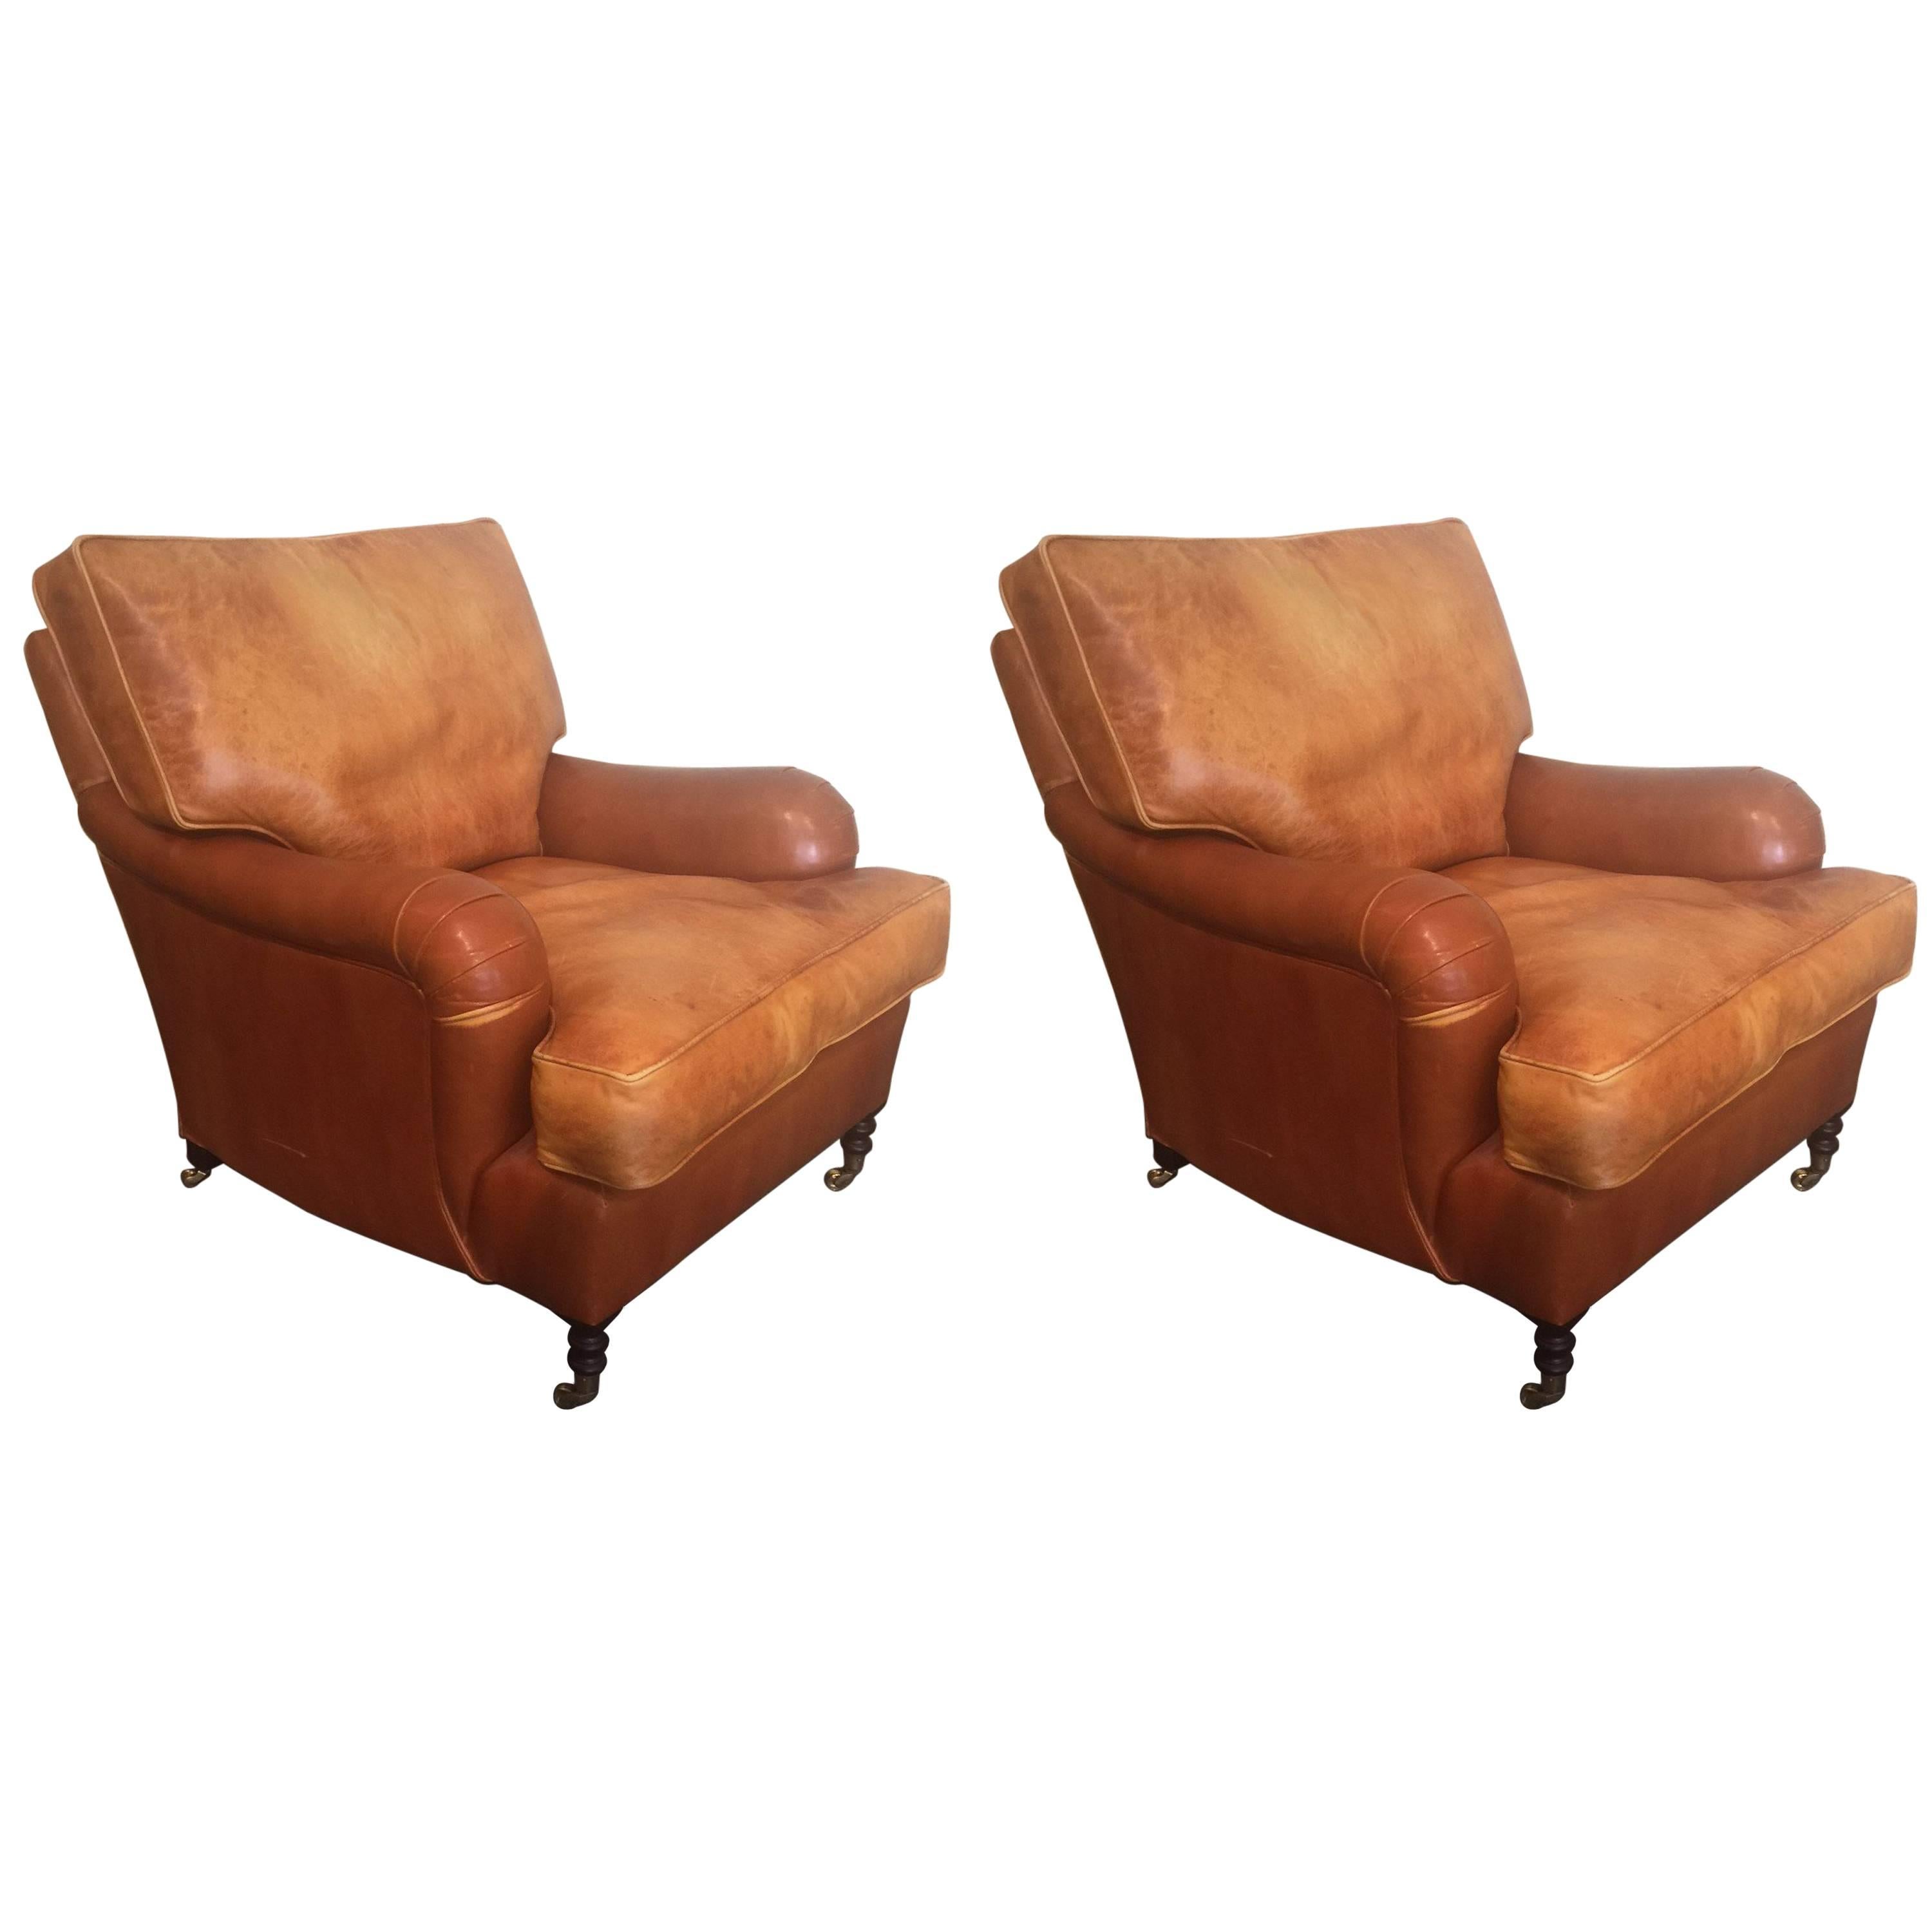 Pair of Distressed Leather Club Chairs by George Smith